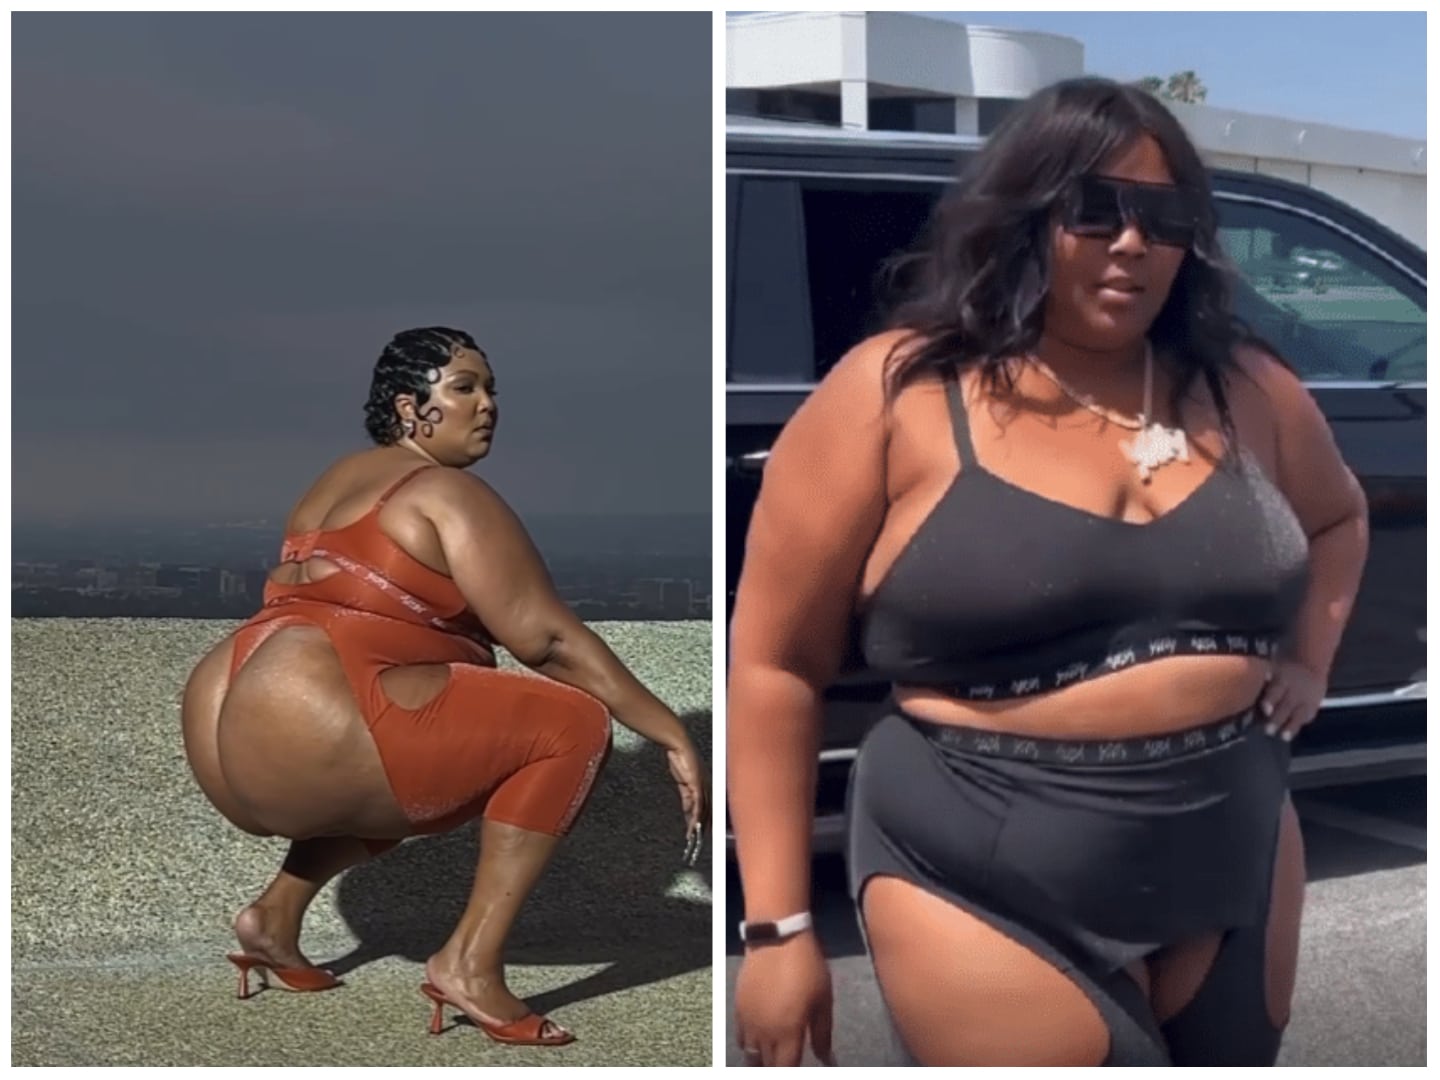 Urbody calls out Lizzo's brand Yitty for gender-affirming line